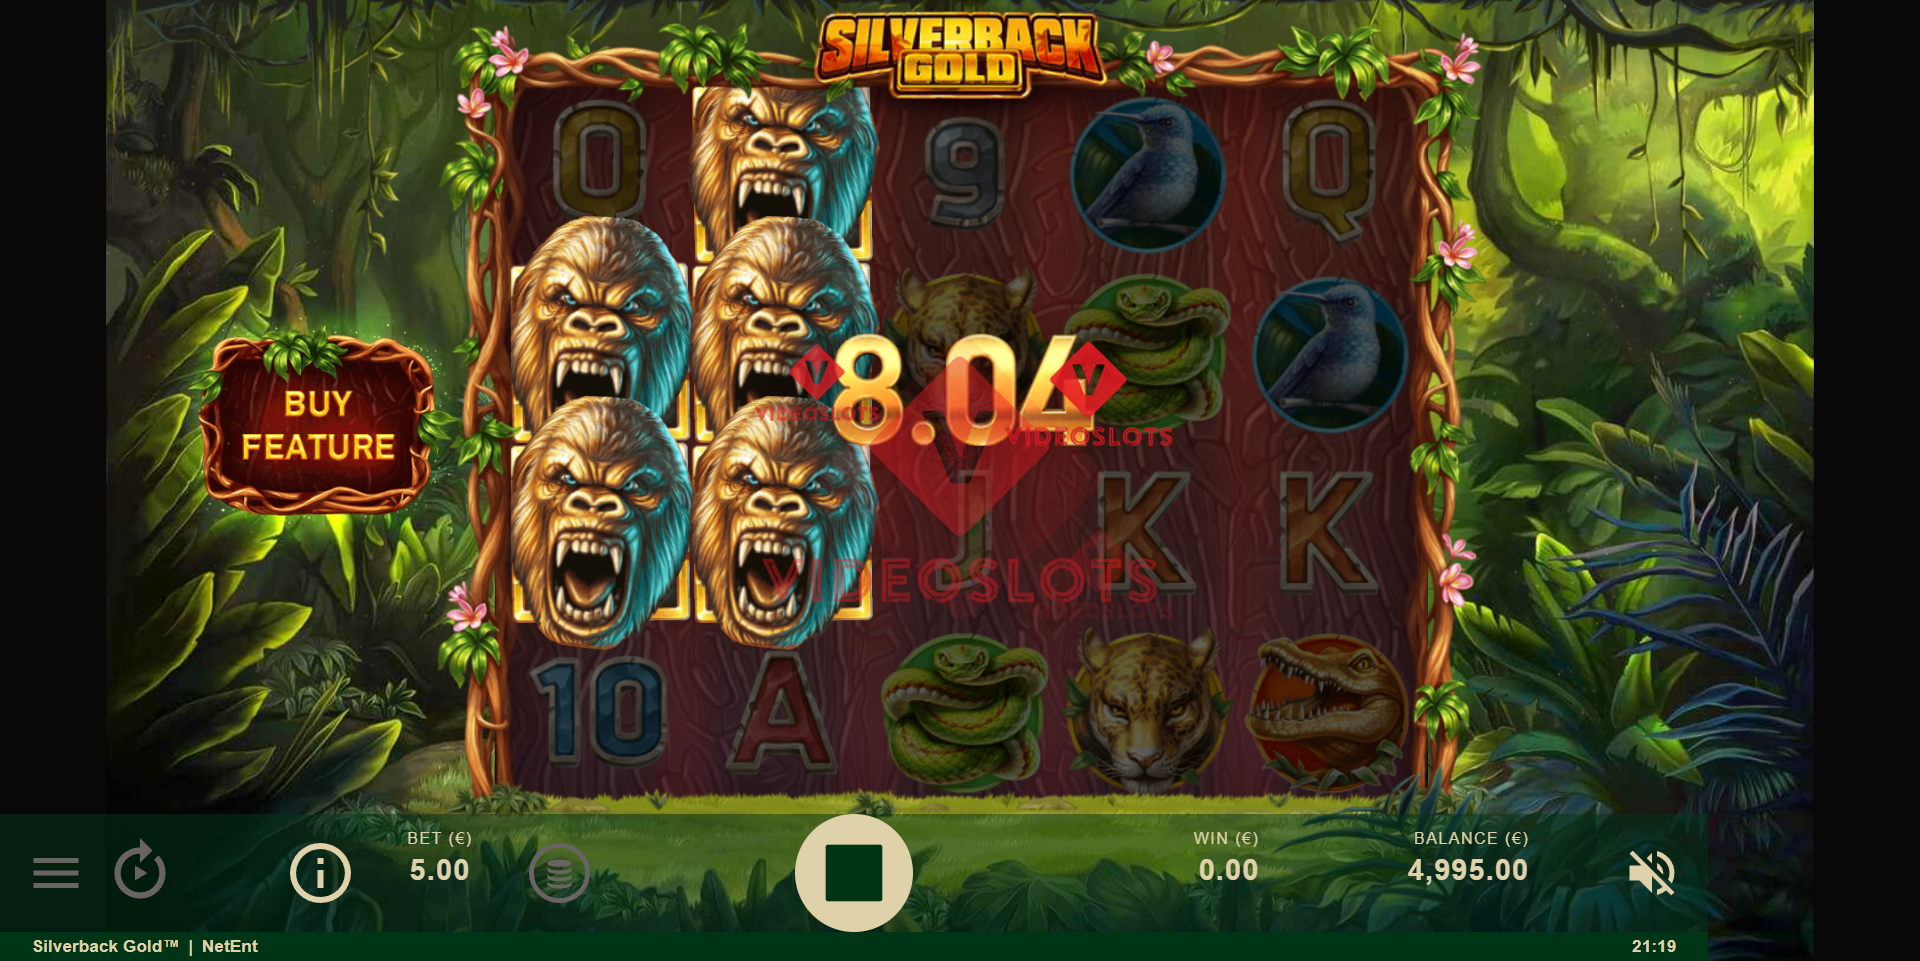 Base Game for Silverback Gold slot from NetEnt